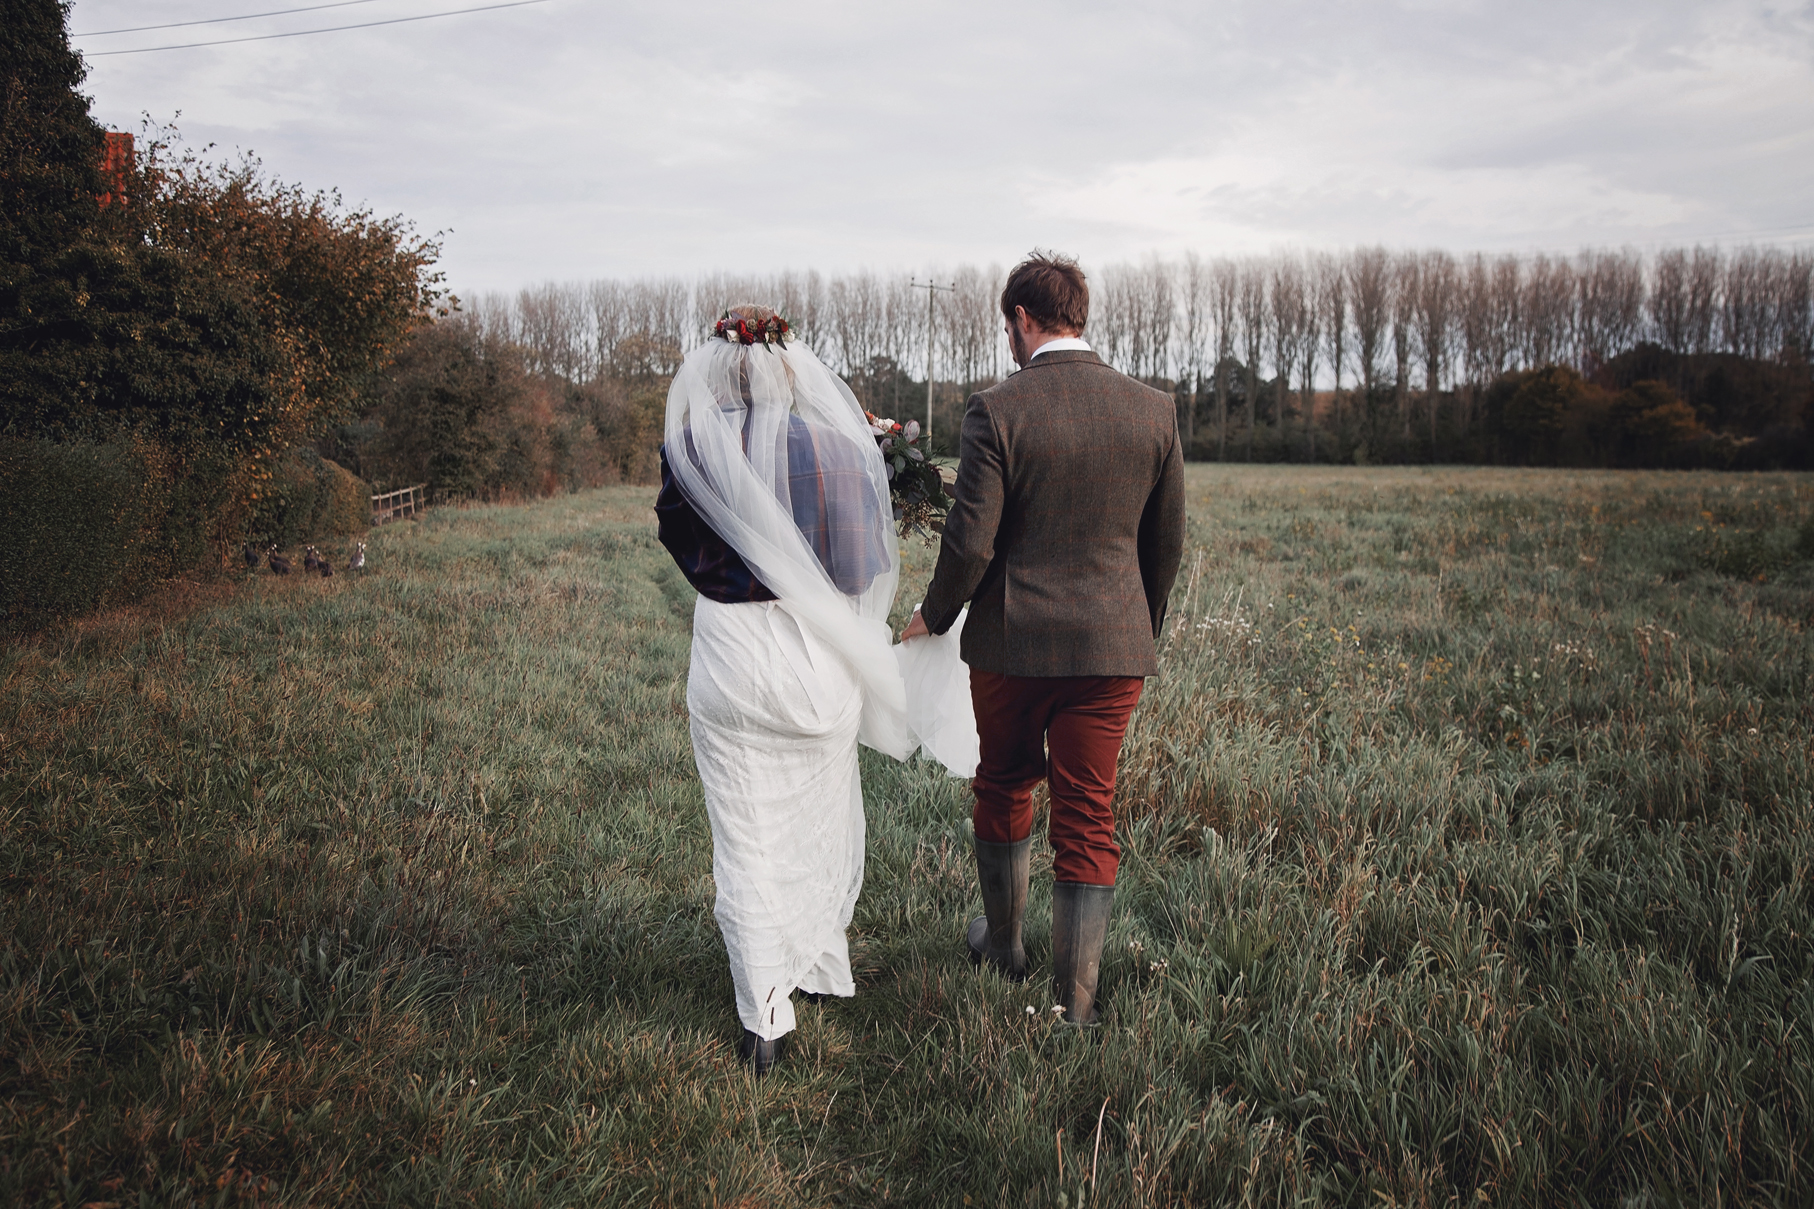 Ollie and Emily's Rustic DIY, Intimate and Relaxed Wedding Day